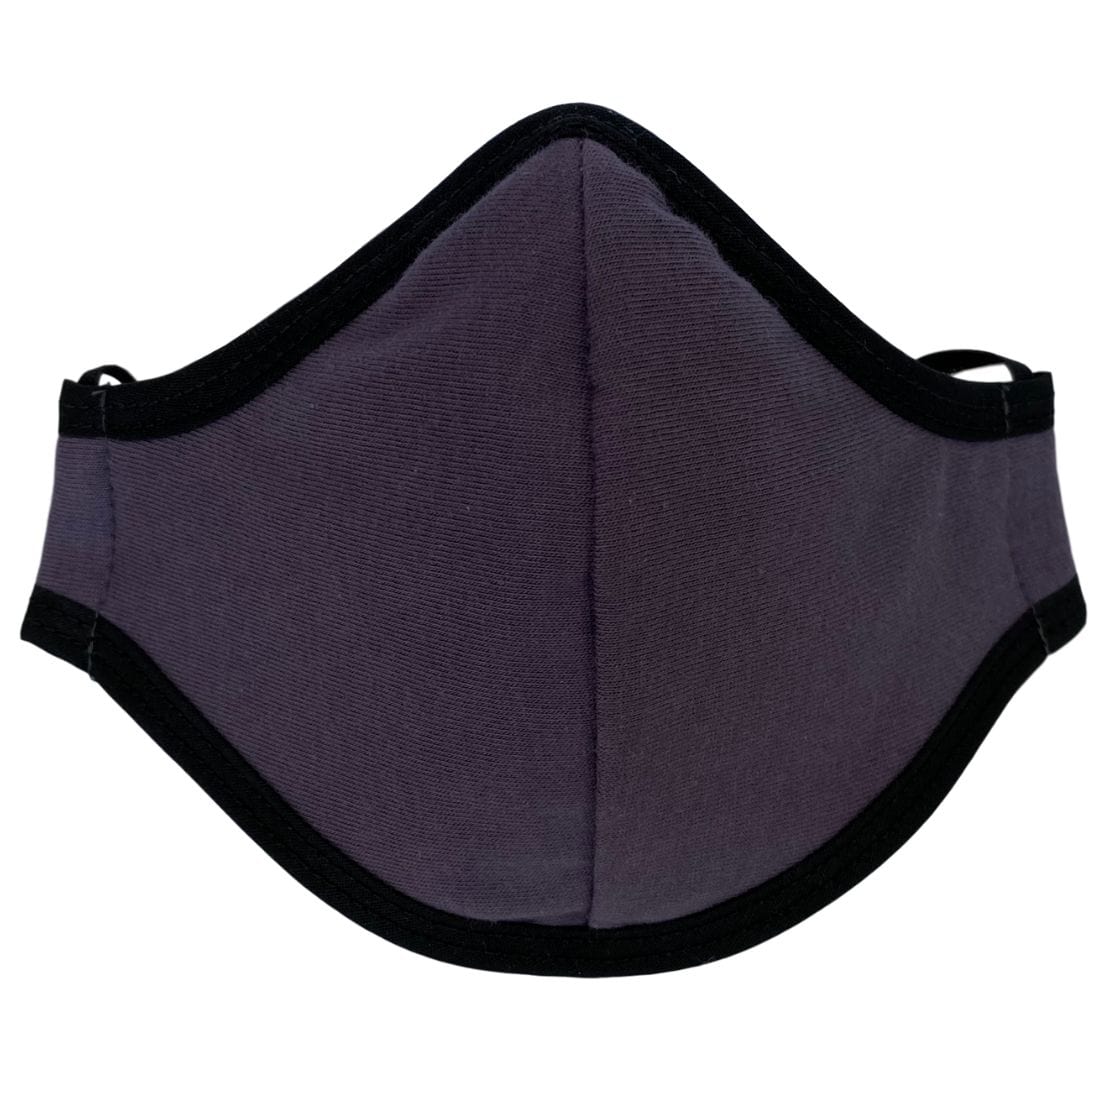 VetMed Solutions Organic Cotton Reusable Face Mask Three Layers (Adjustable 4 Inch Stiffener), Clearance 50% Off, Final Sale